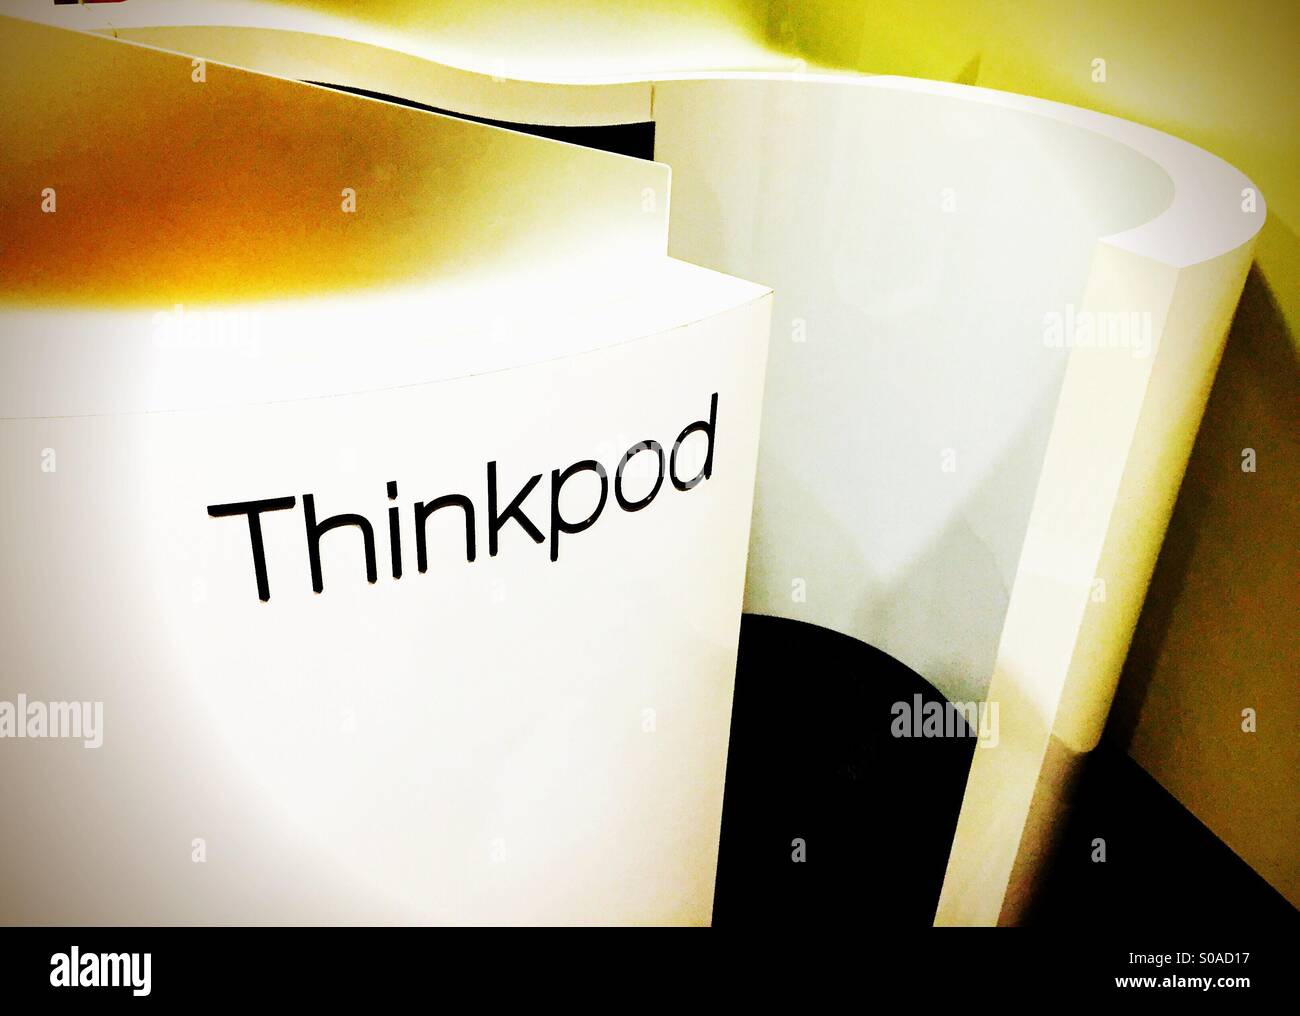 A Thinkpod, used to promote productivity, creativity and problem-solving. Stock Photo